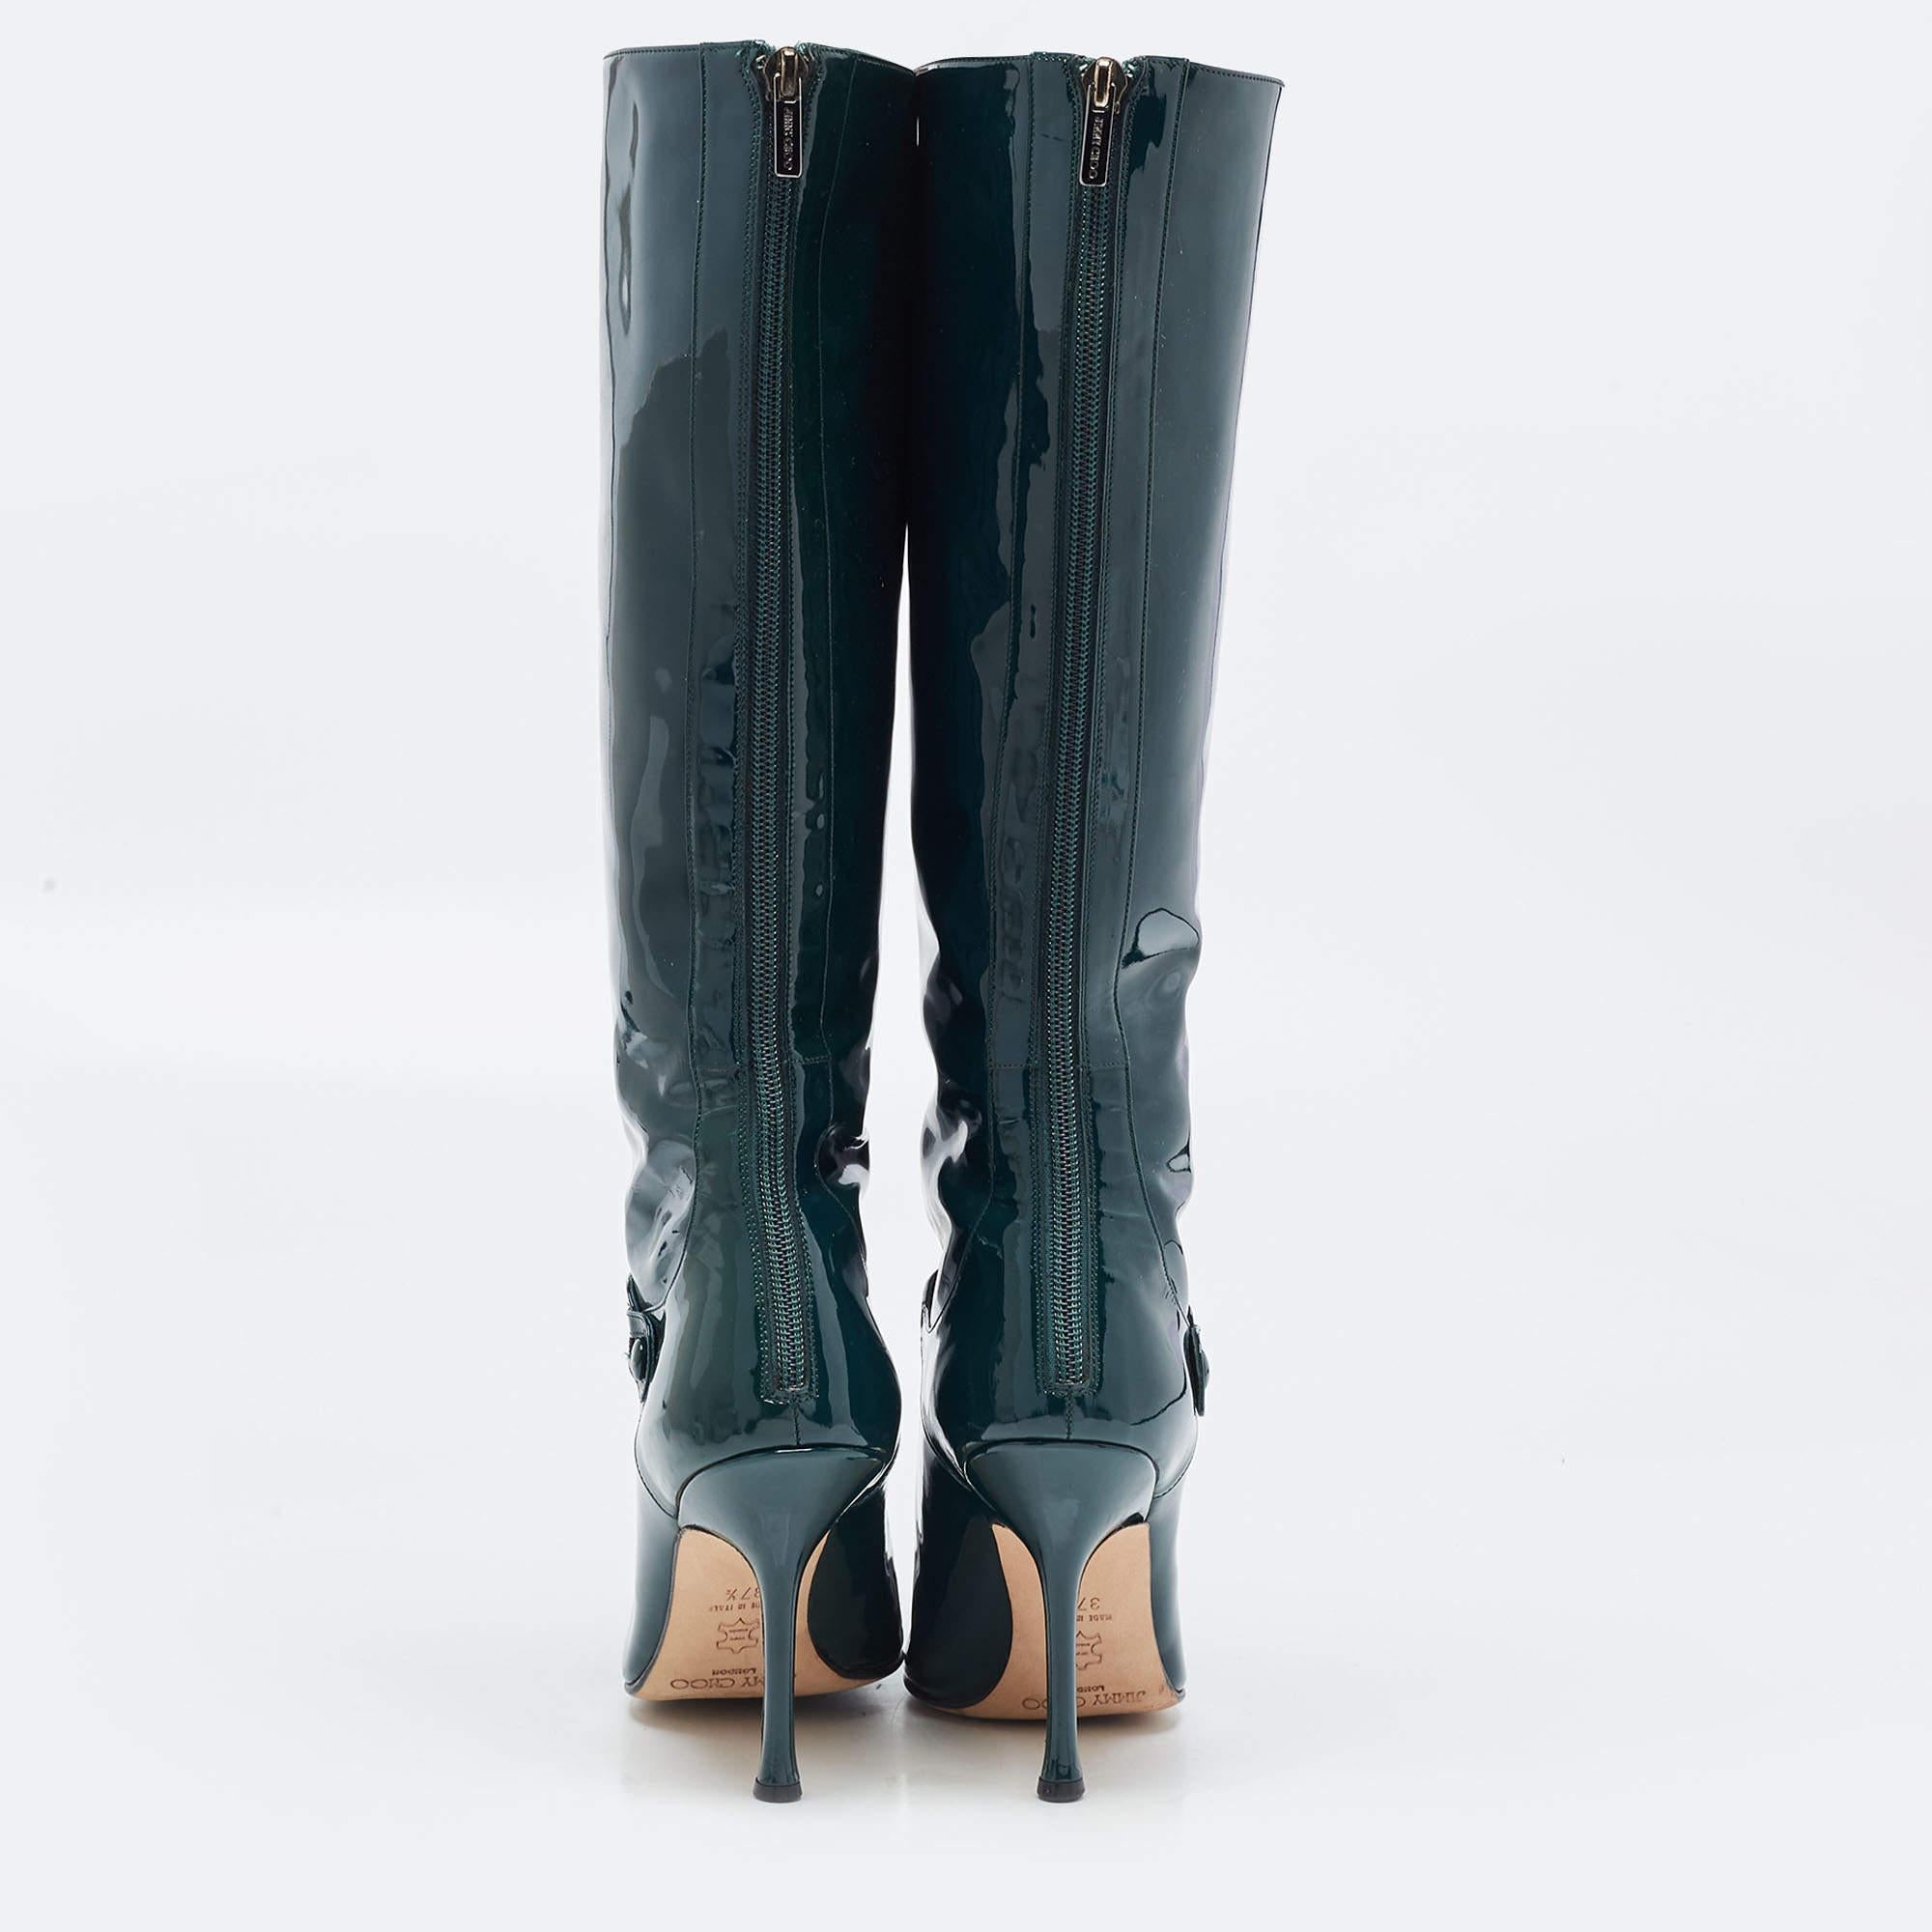 Jimmy Choo Green Patent Leather Calf Length Boots Size 37.5 2